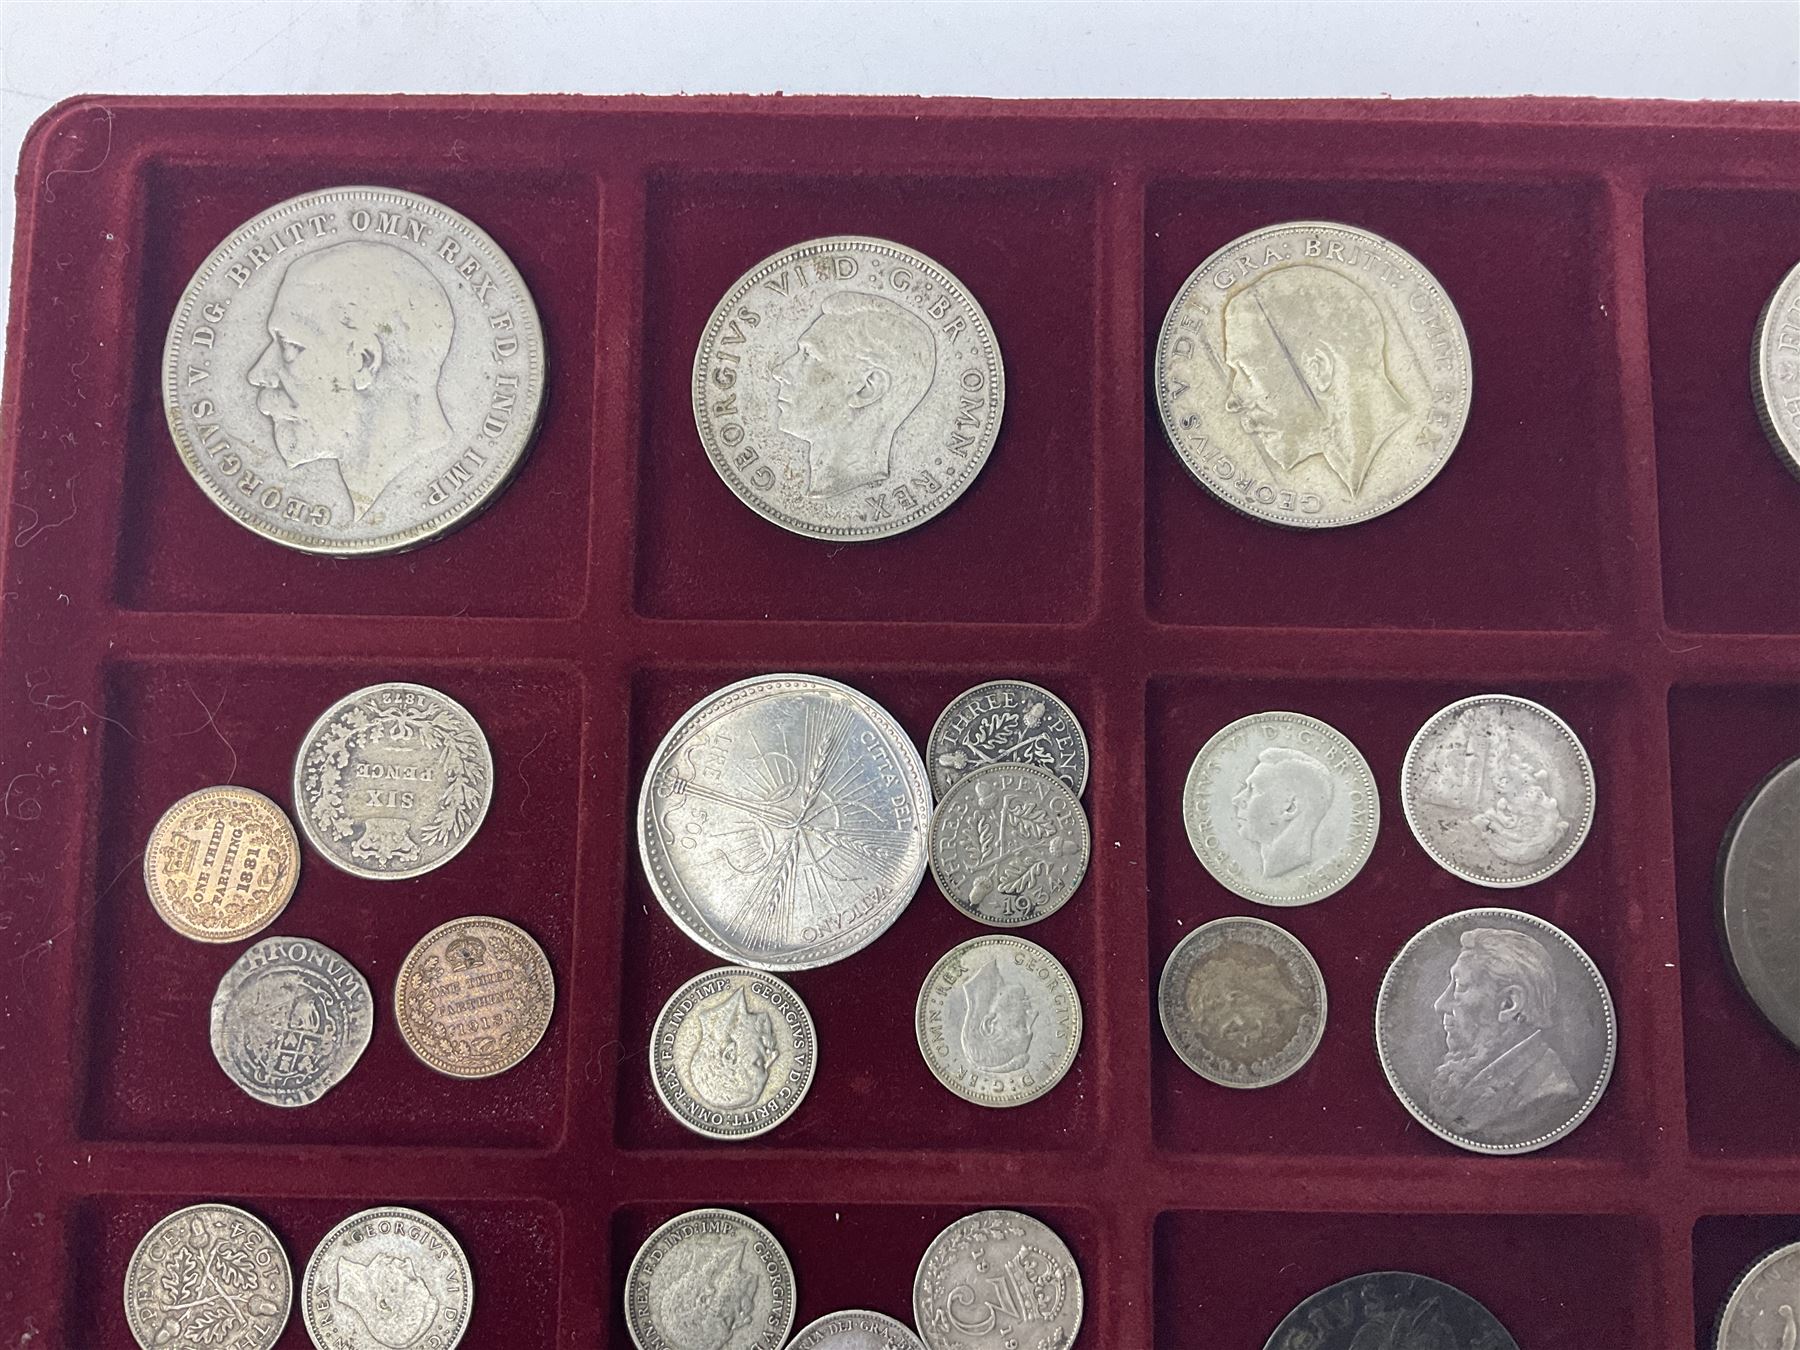 Great British and World coins including King George V 1935 crown - Image 2 of 9